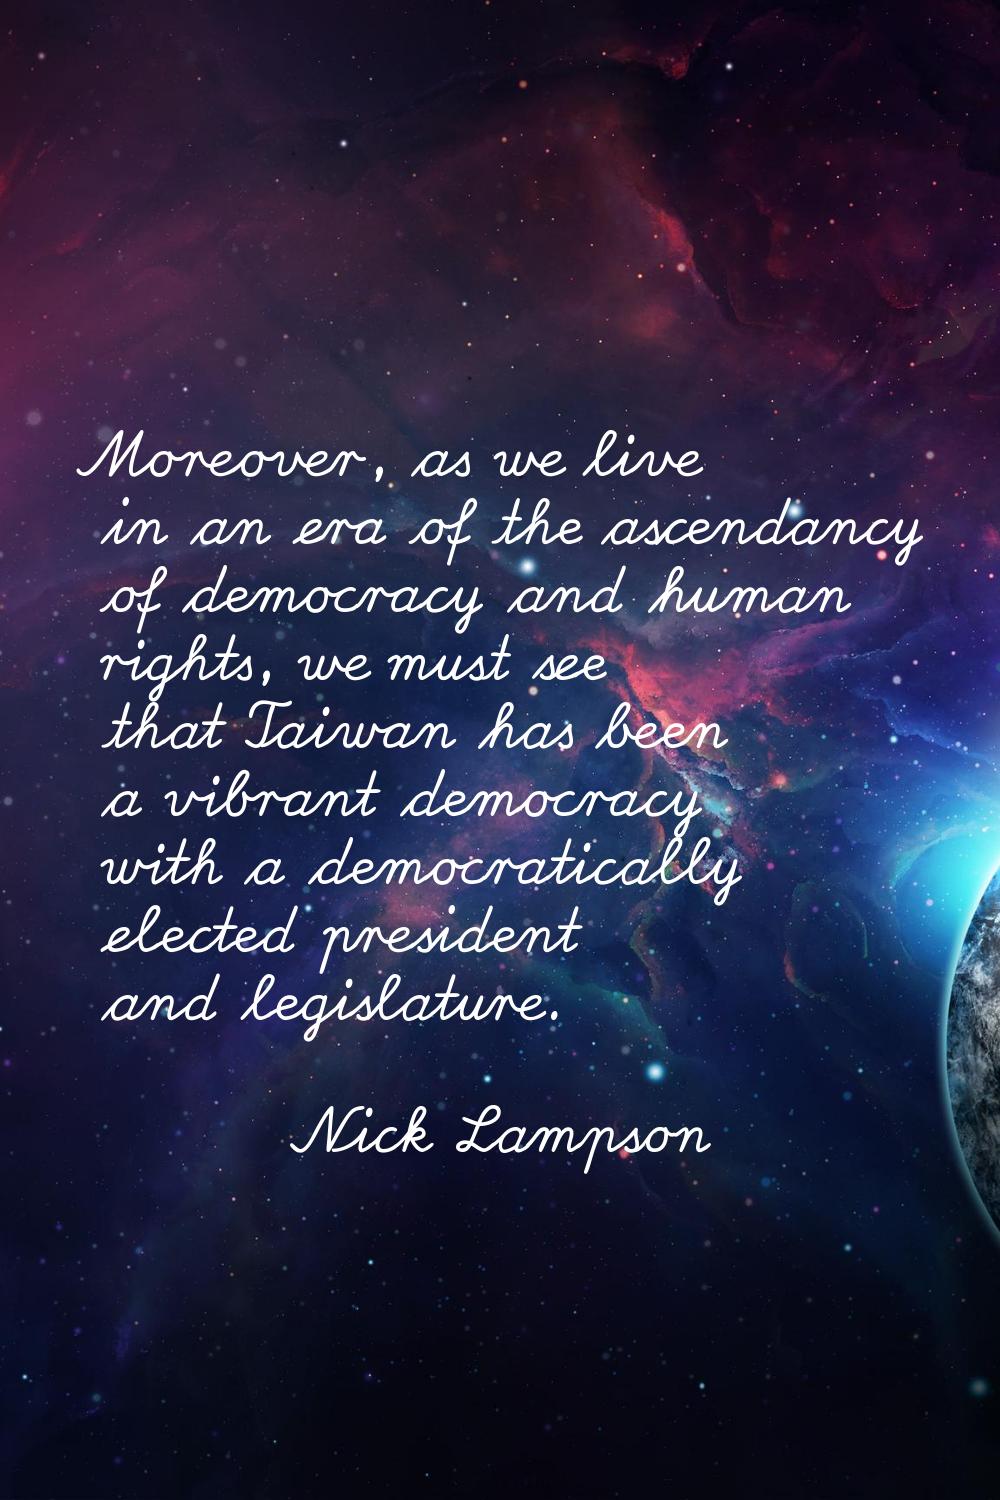 Moreover, as we live in an era of the ascendancy of democracy and human rights, we must see that Ta